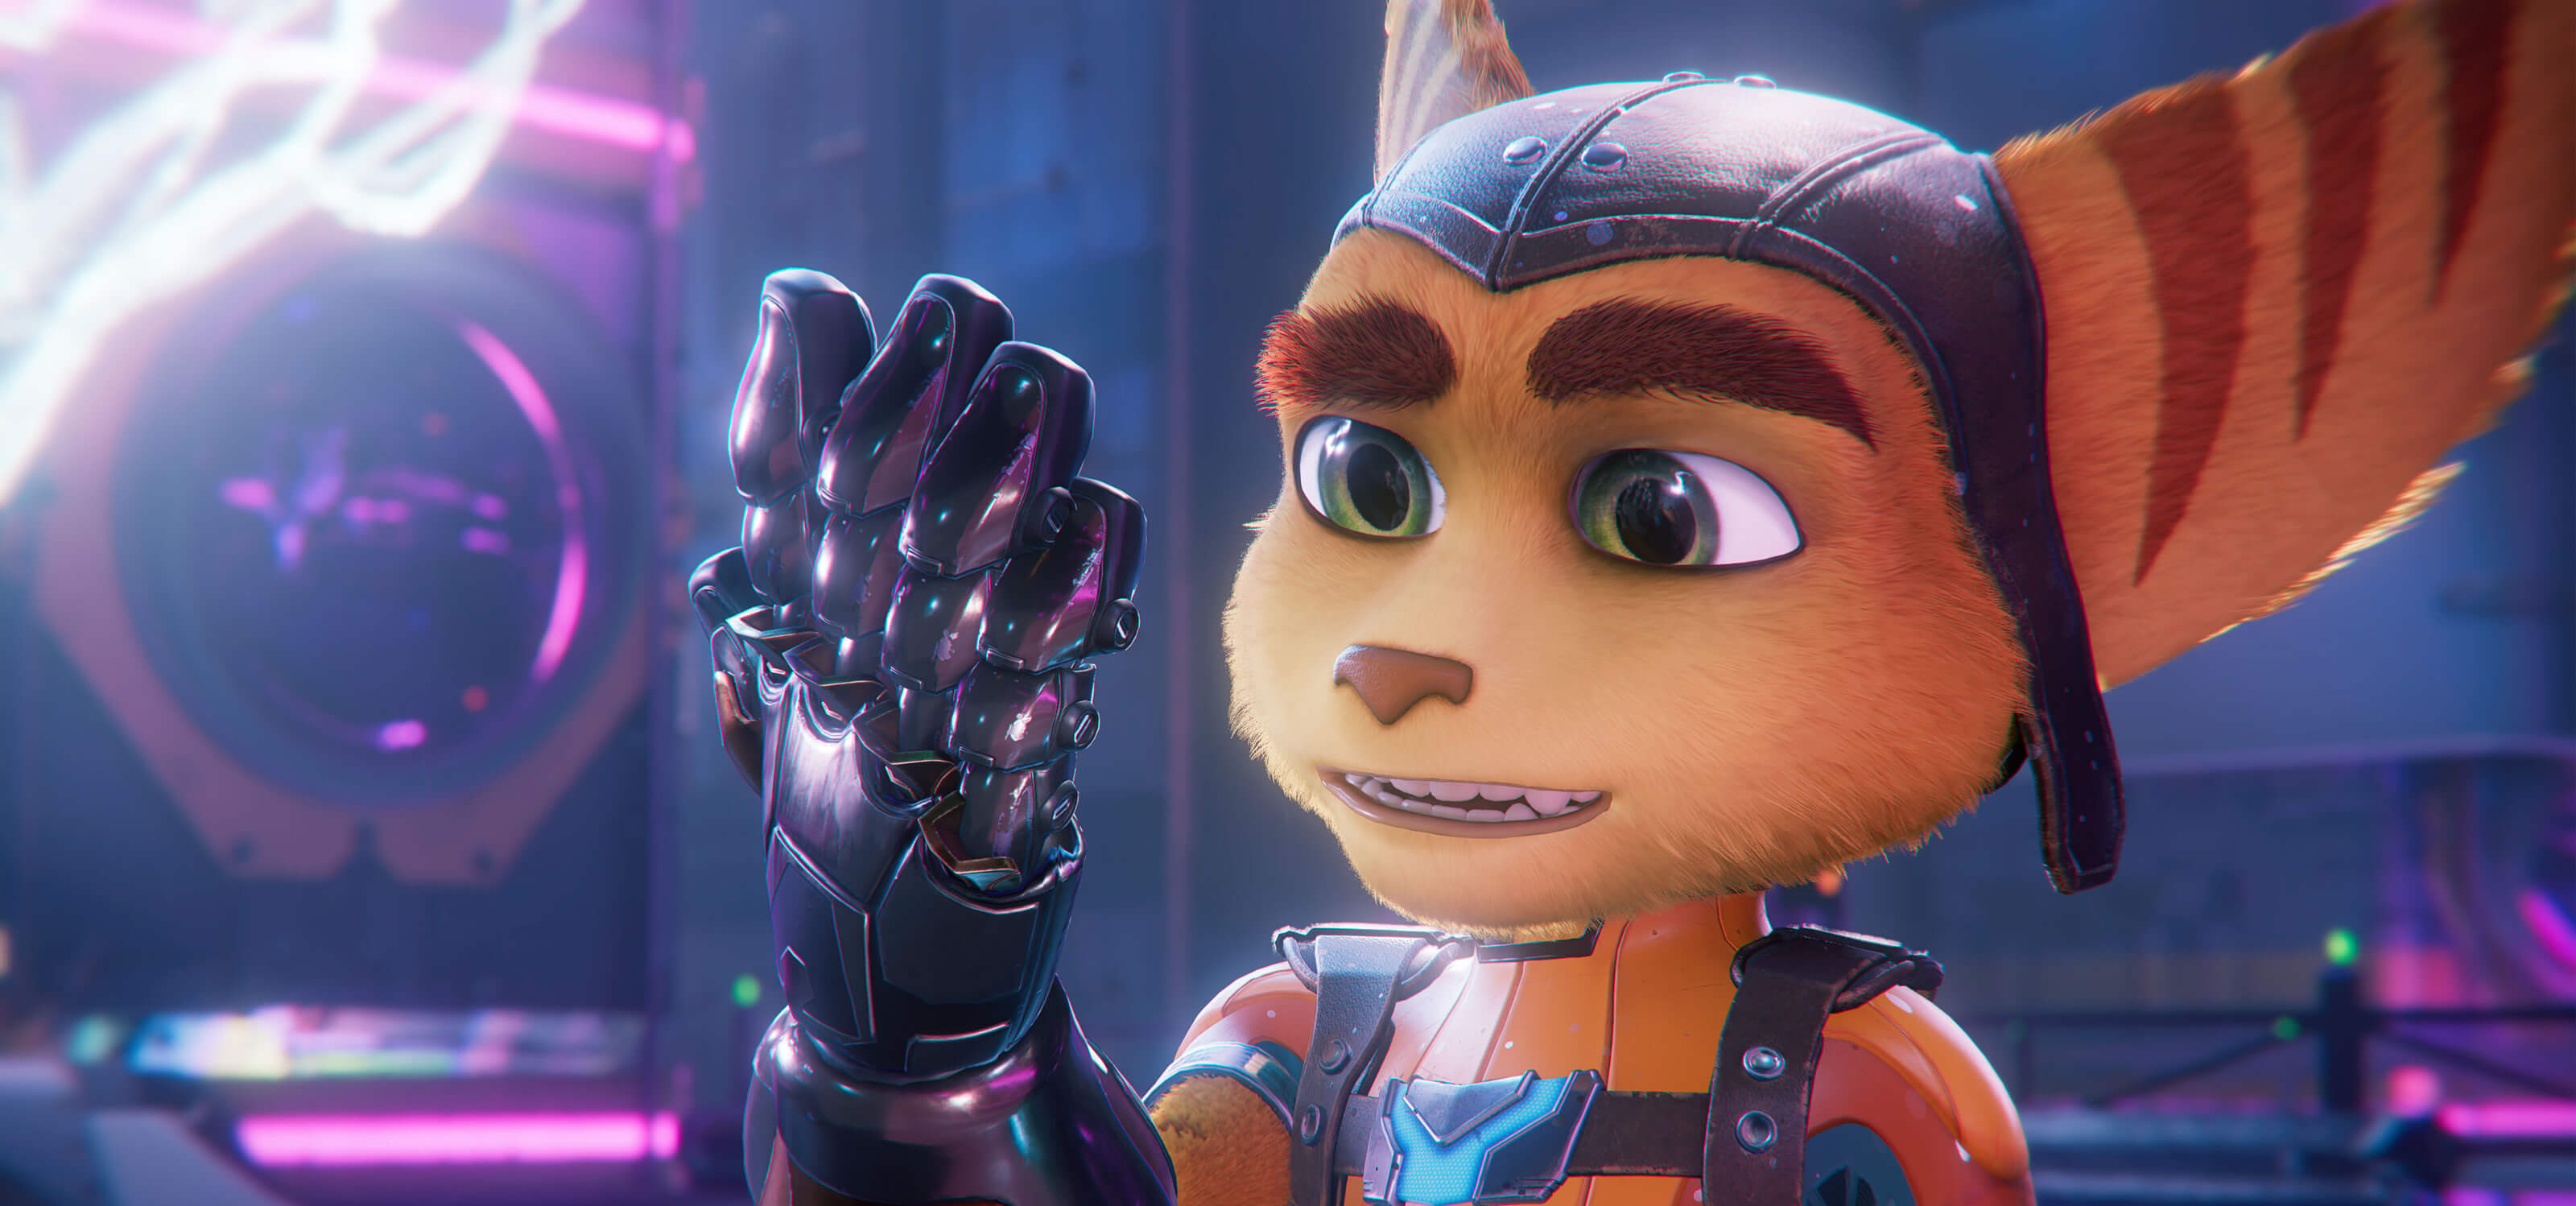 Ratchet admires his mechanical glove in a screenshot from Ratcher &amp; Clank: Rift Apart.